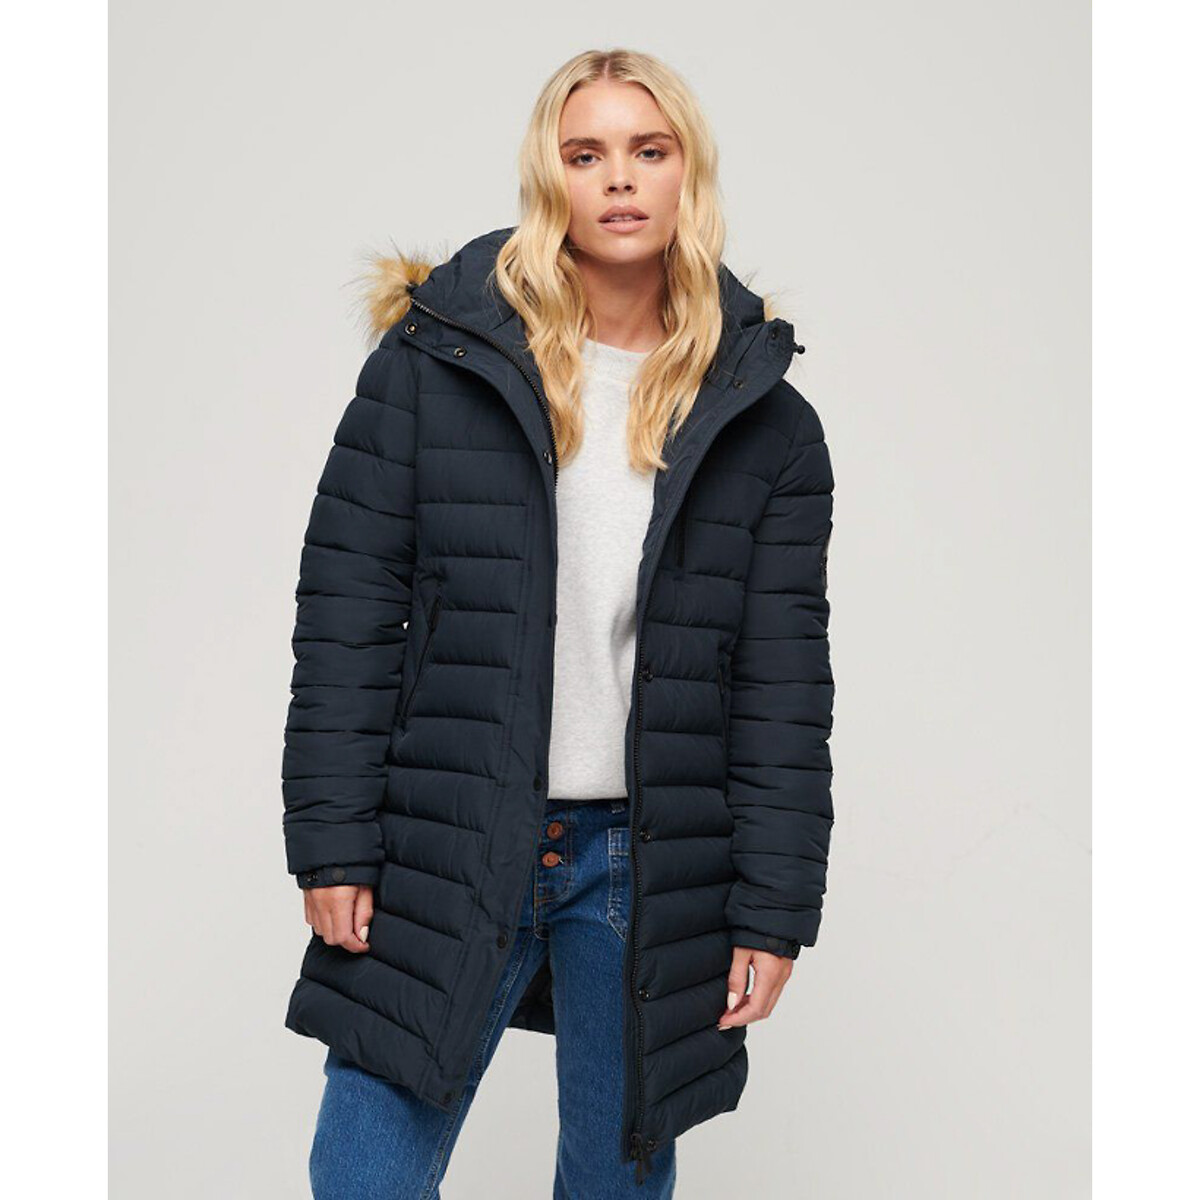 Women's Puffer Jackets, Quilted & Padded Coats, La Redoute ESPRIT